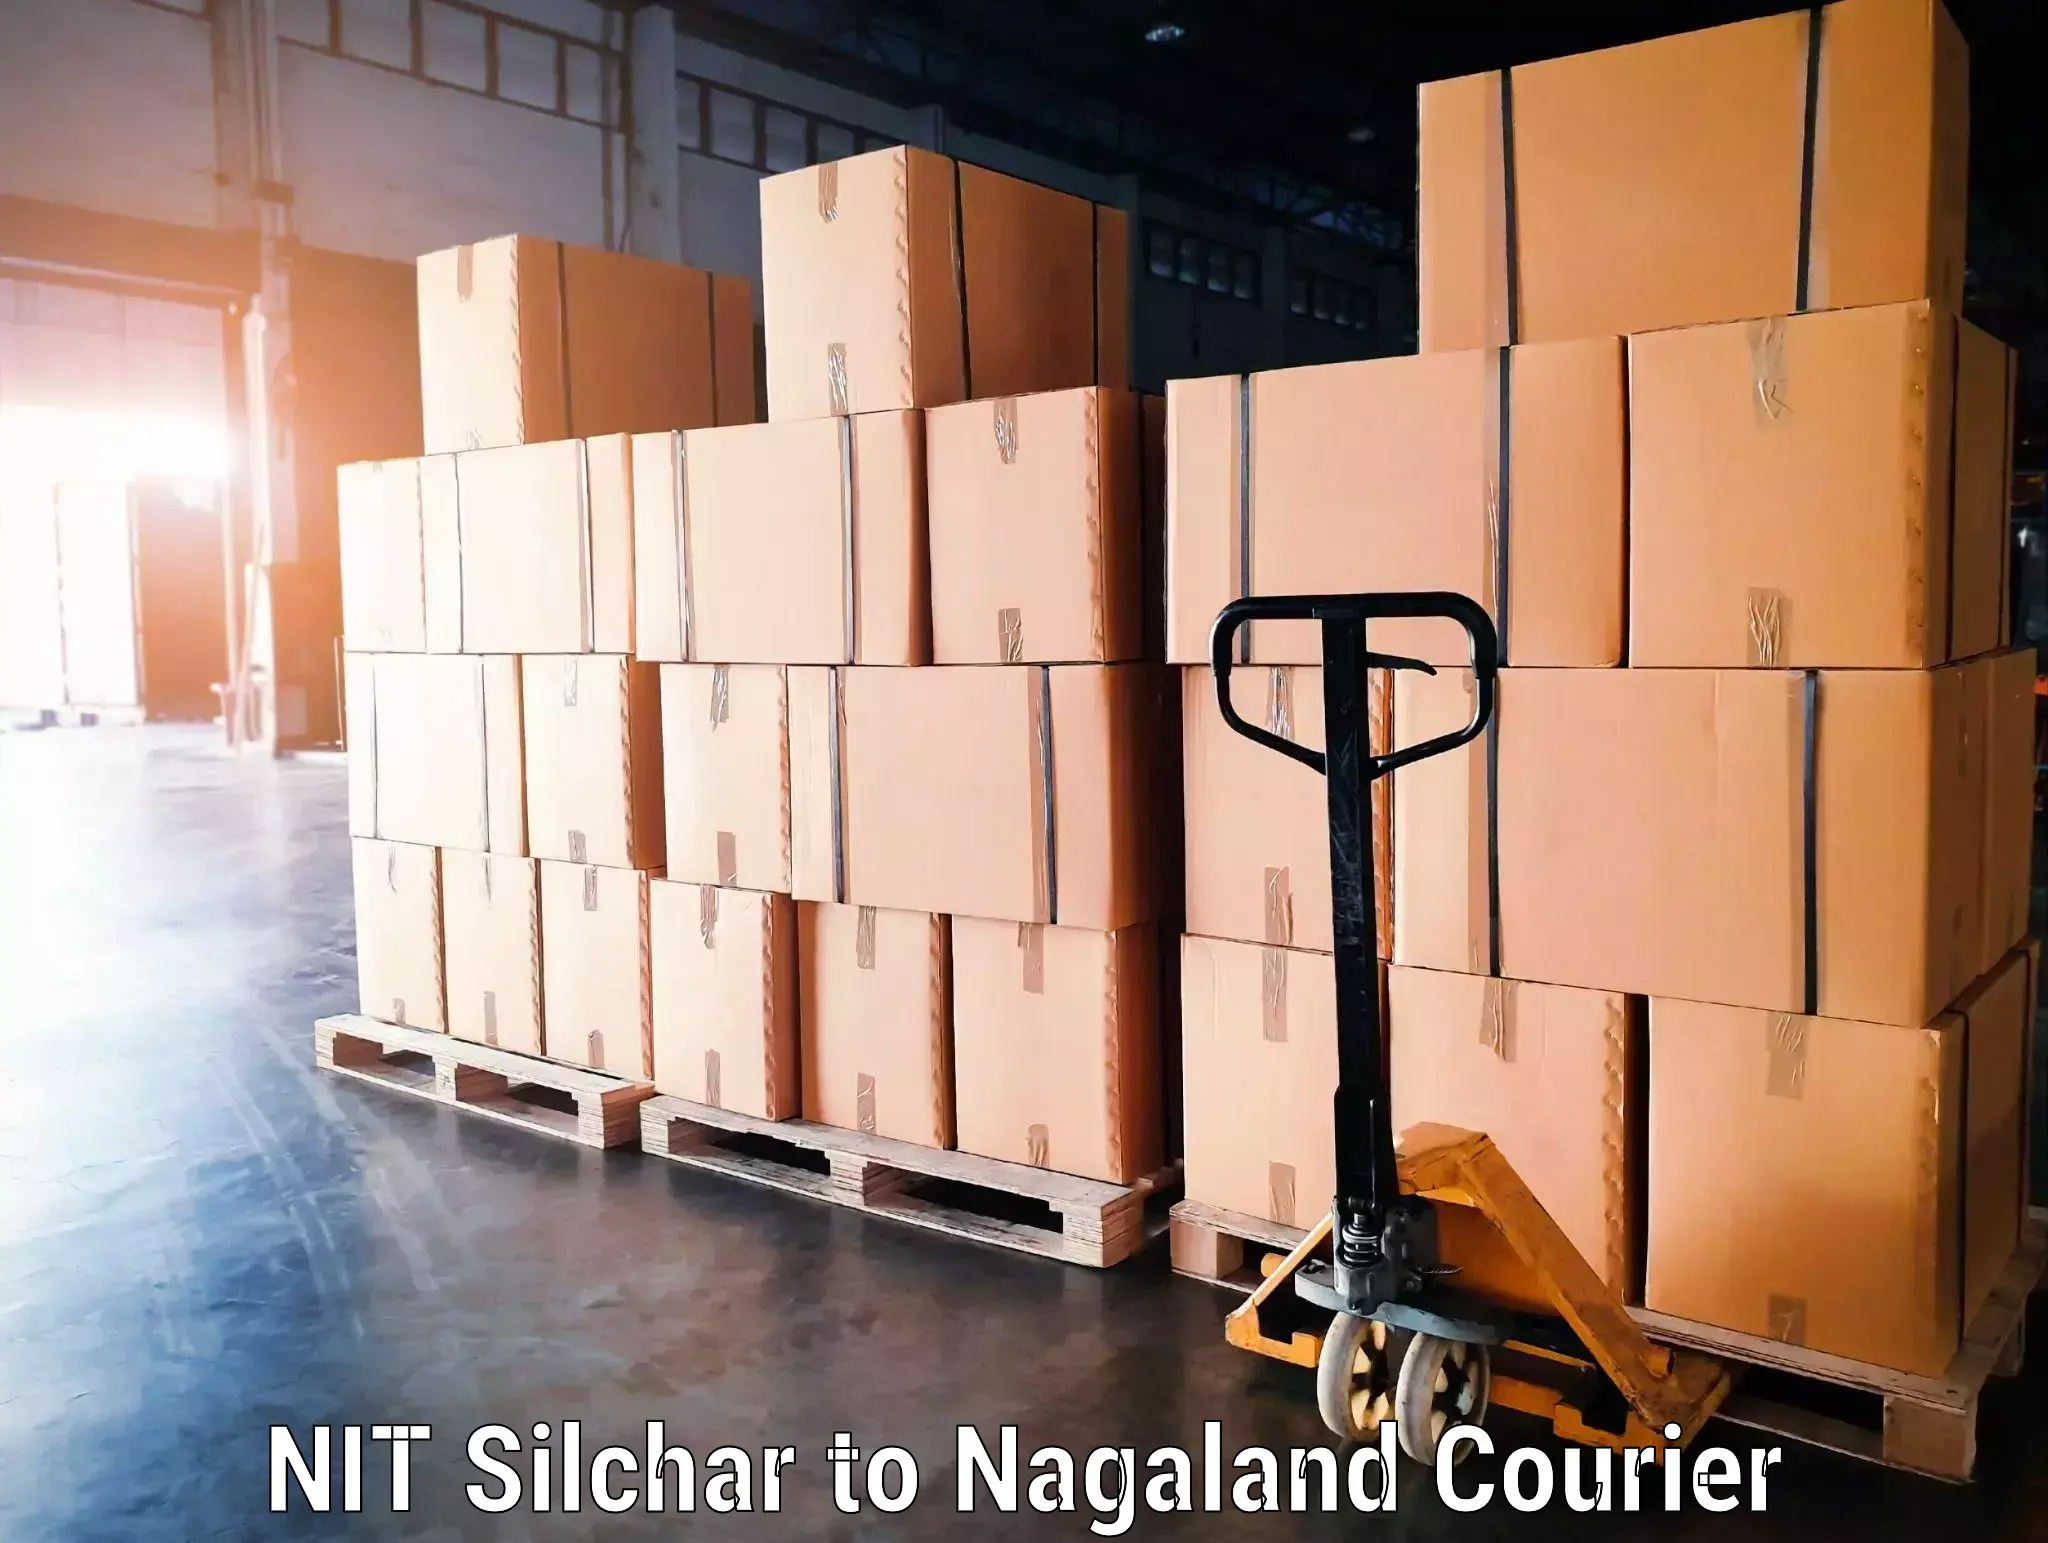 Instant baggage transport quote NIT Silchar to Kohima